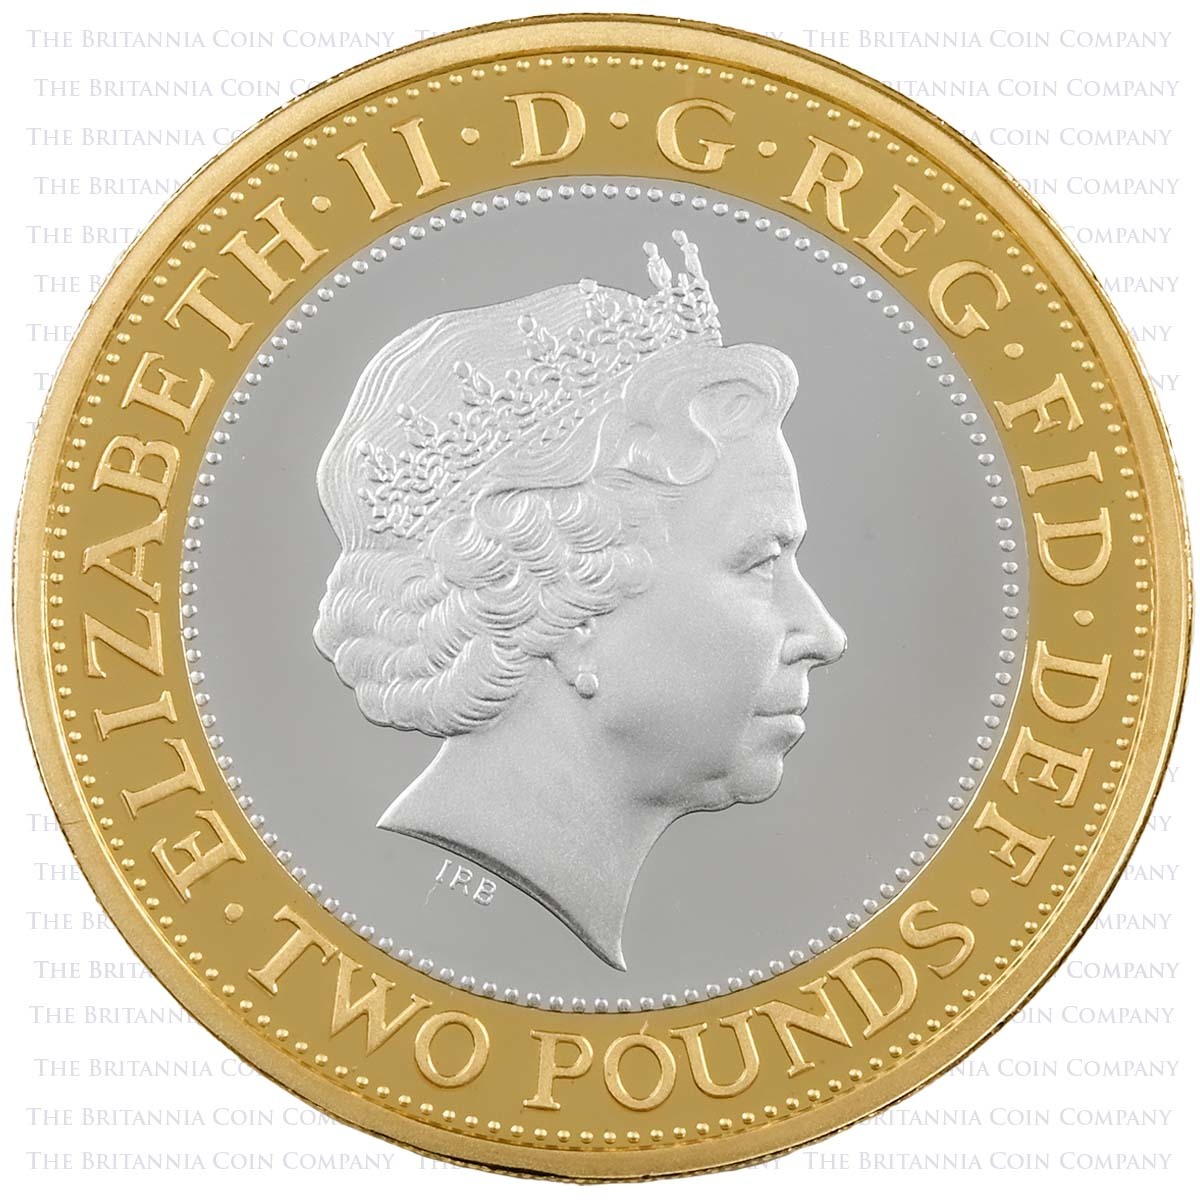 UK13GUPF 2013 Golden Guinea Two Pound Piedfort Silver Proof Coin Obverse